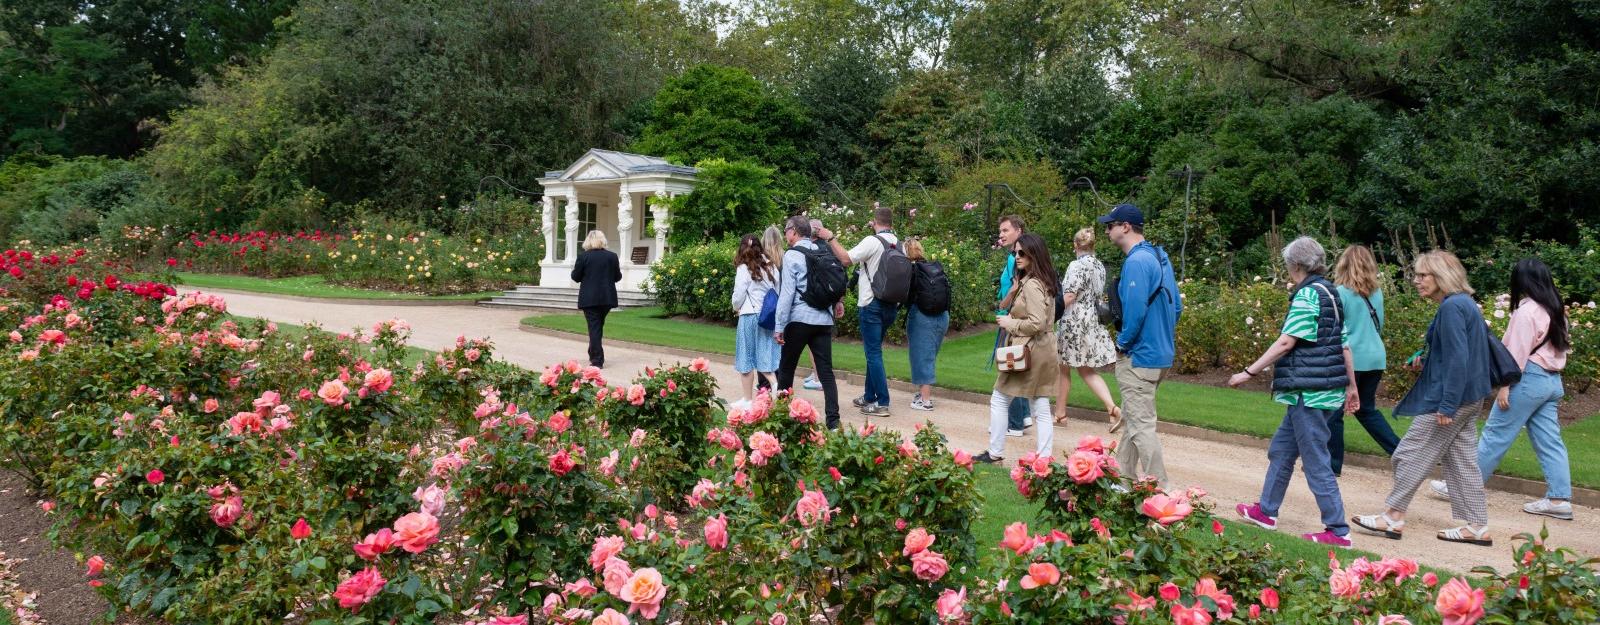 Visitors on a Garden Highlights Tour